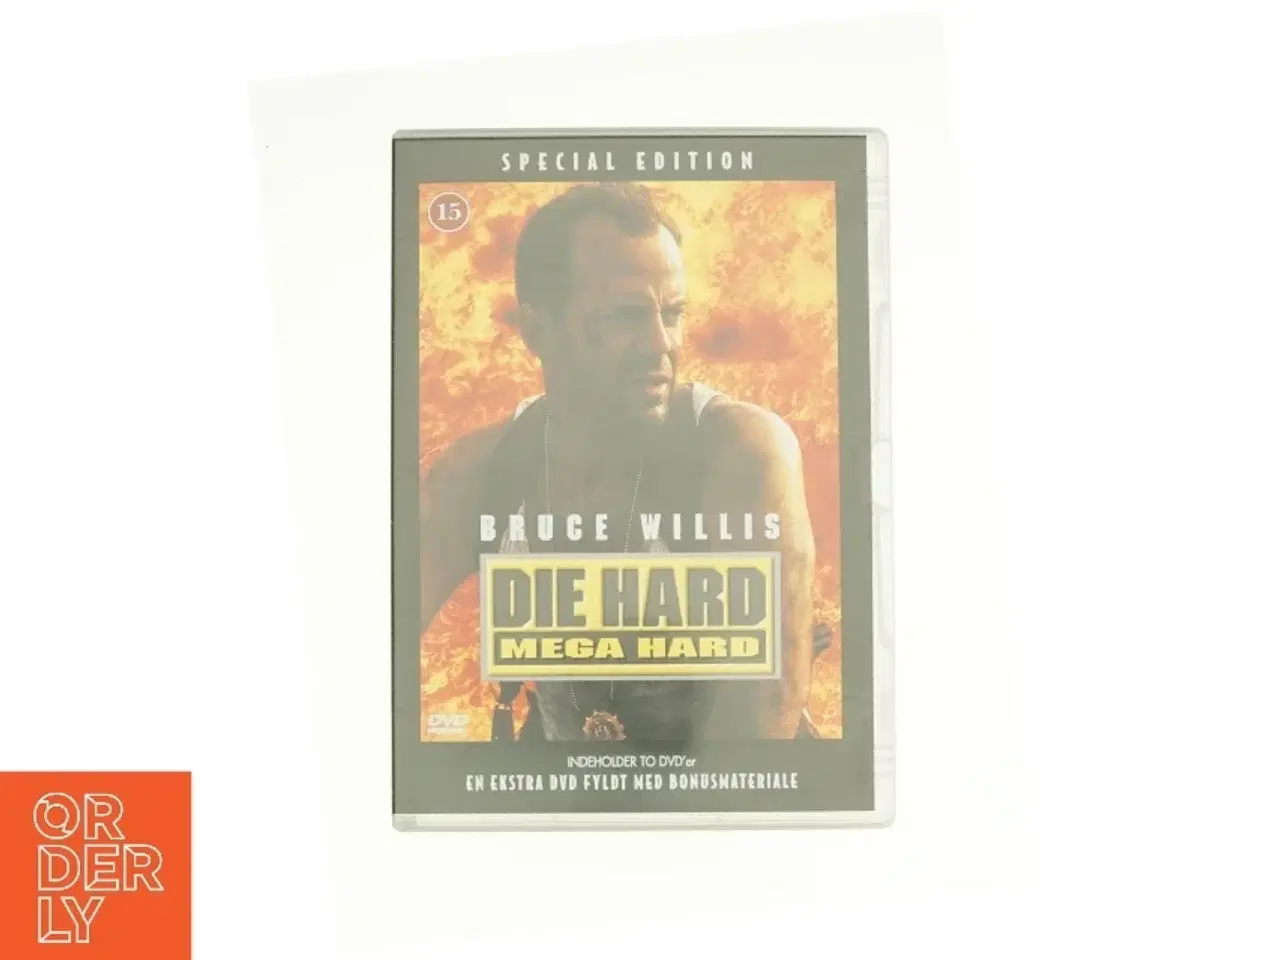 Billede 1 - Die Hard Mega Hard Coll                            <span class="label label-blank pull-right">Special edition</span> fra DVD